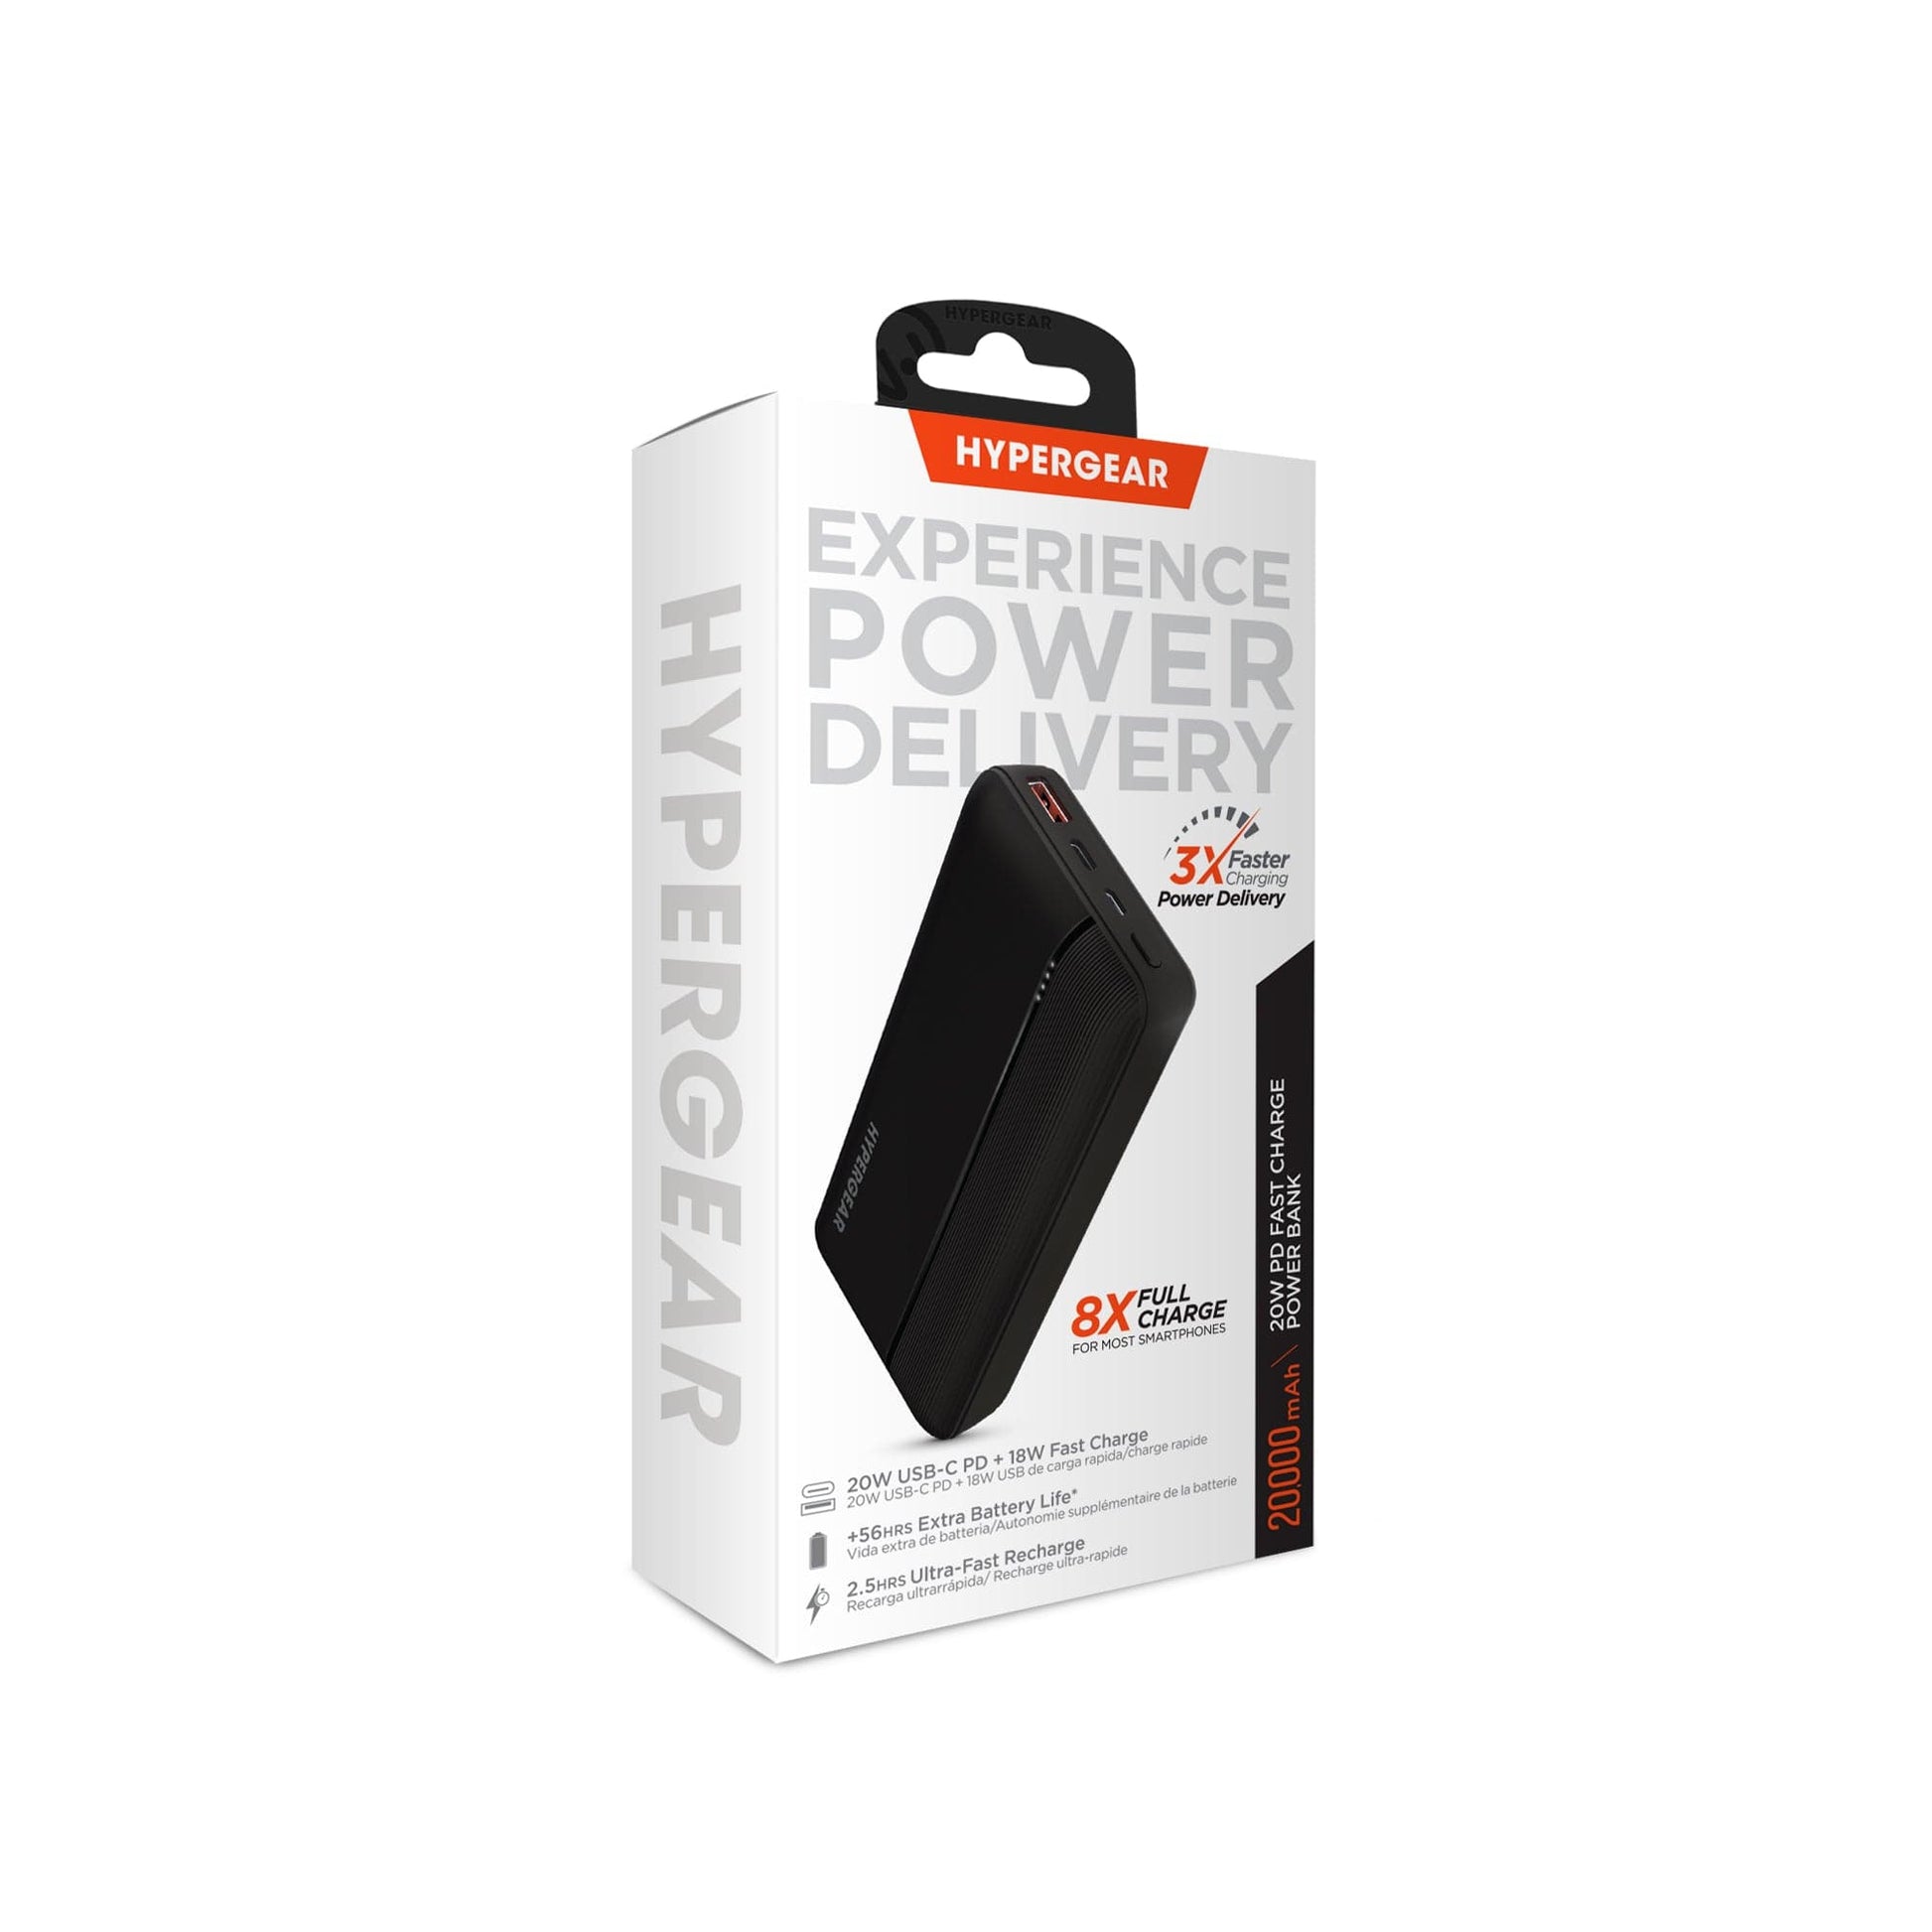 Hypergear 20,000mAh Fast Charge Power Bank with 20W USB-C PD – DLTechCO